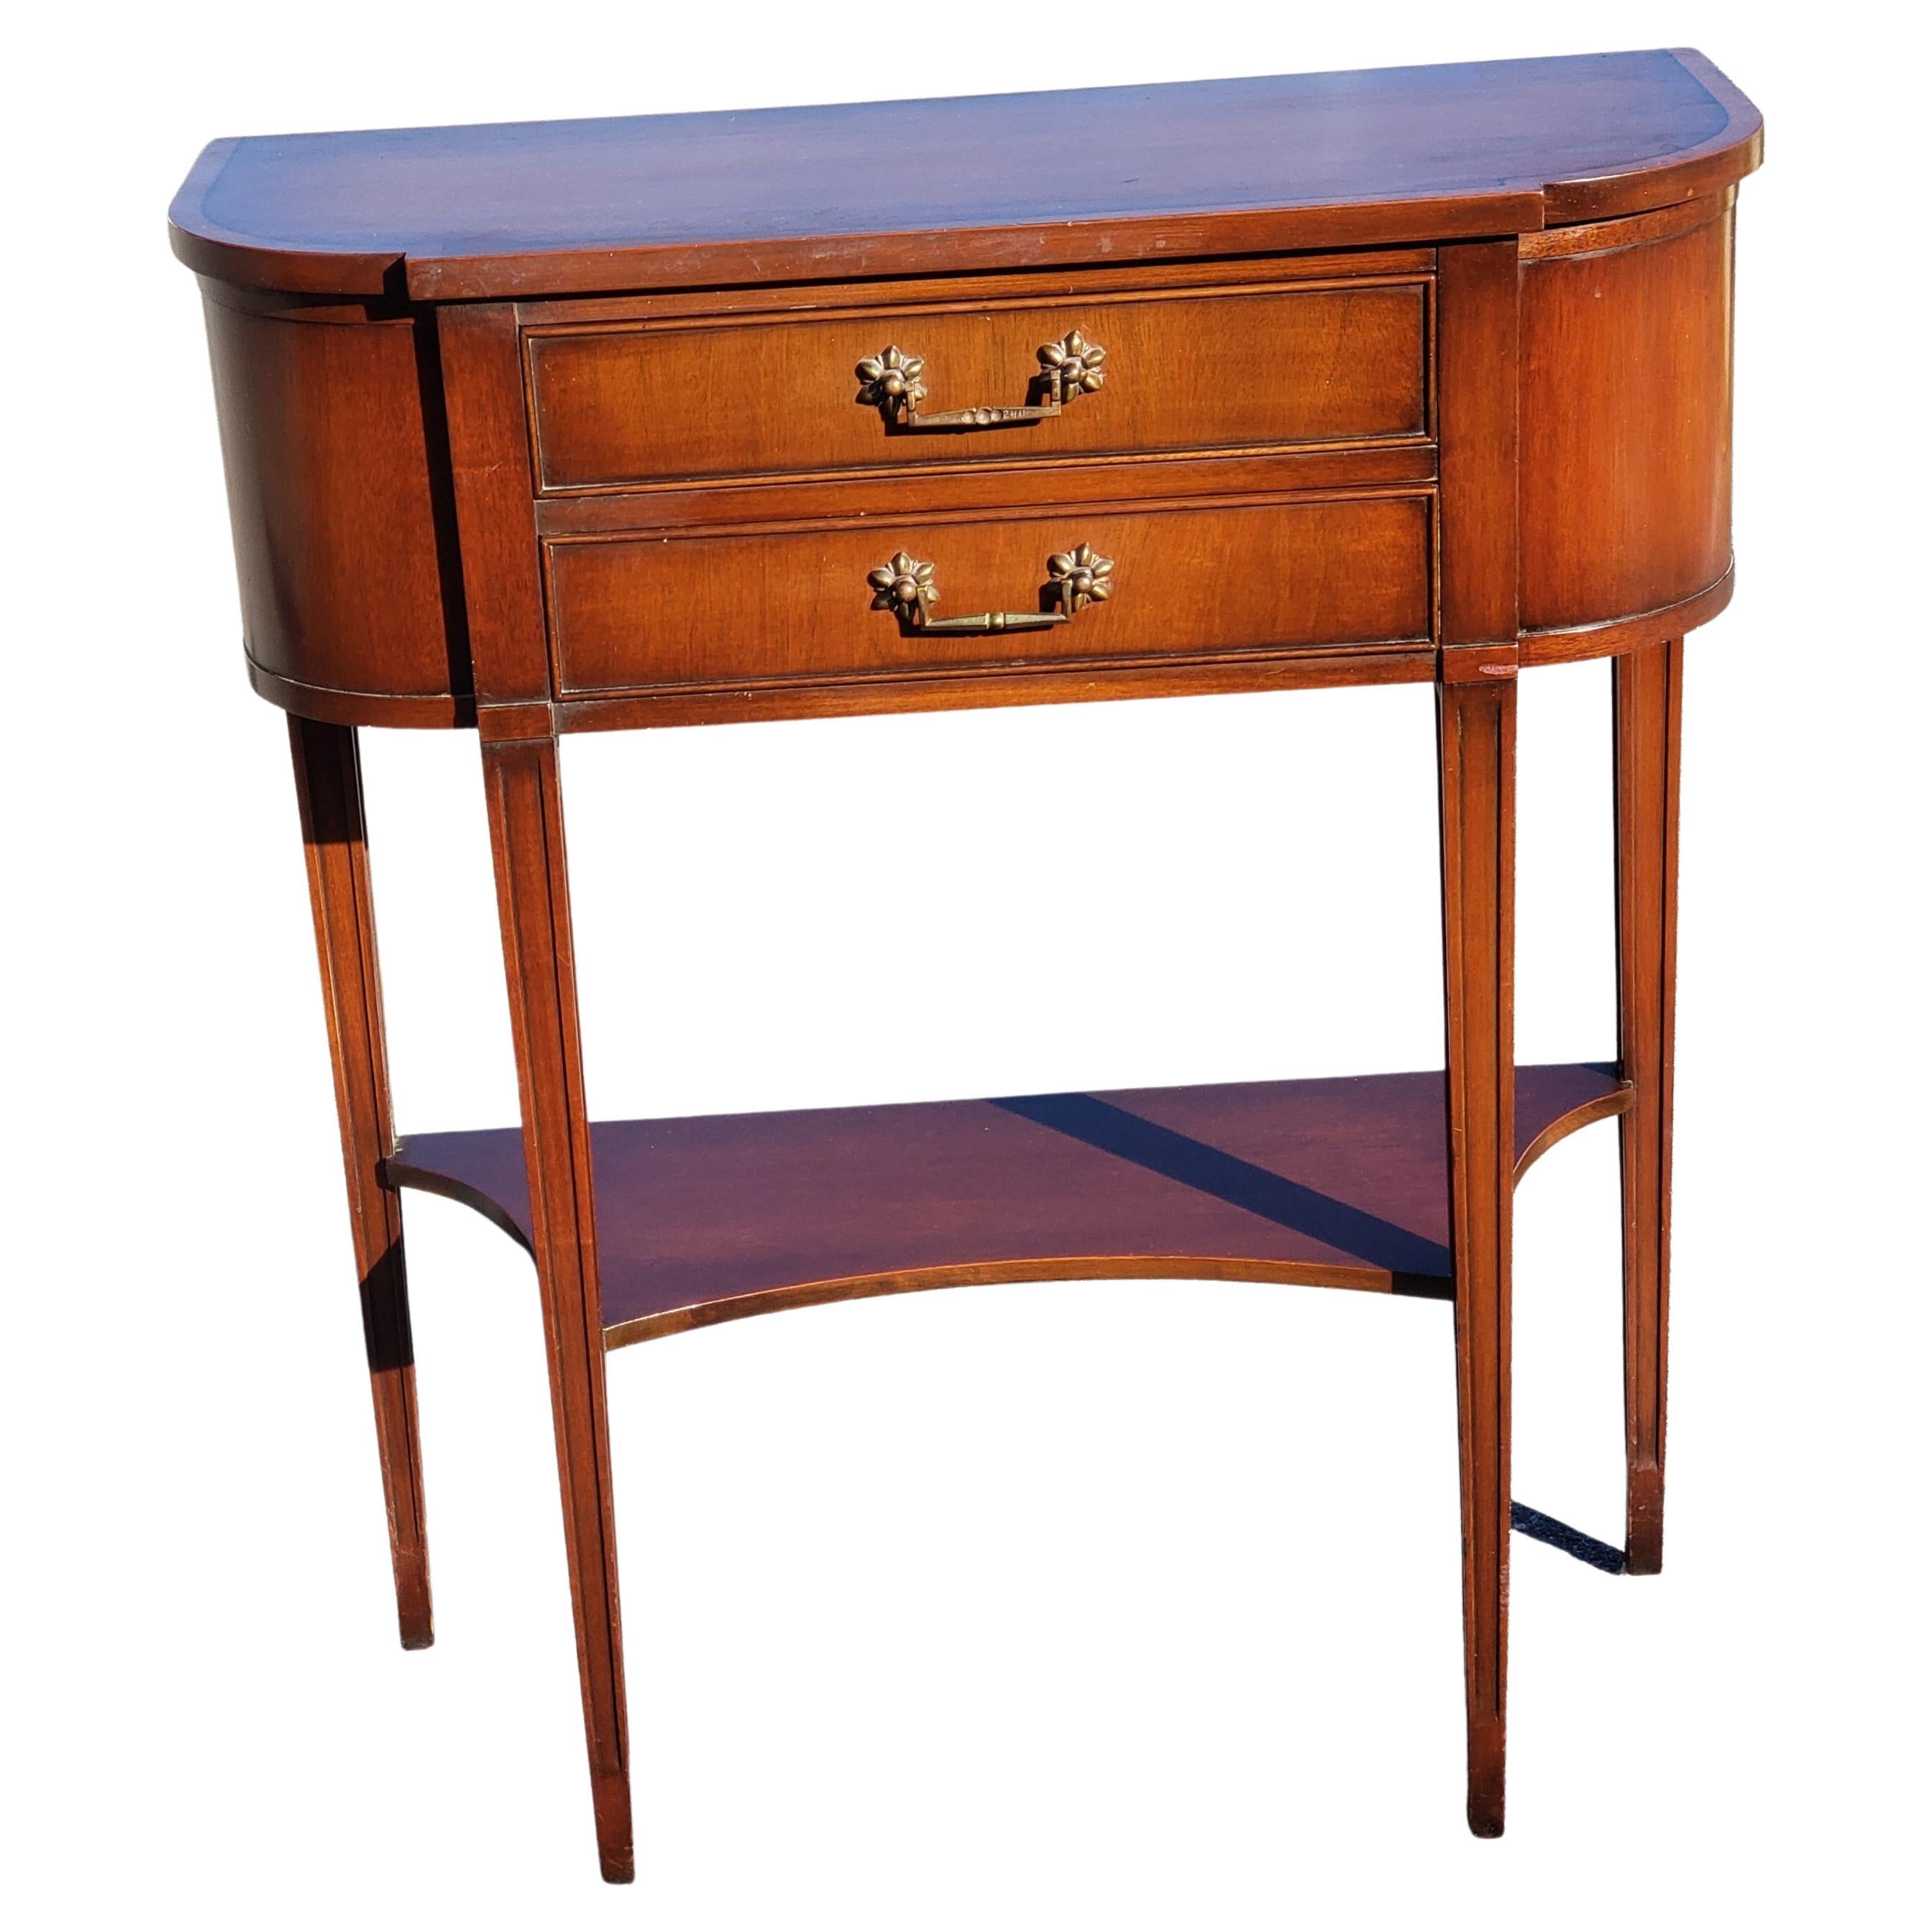 Marvelous Pair of regency banded mahogany regency console tables, circa 1940s.
Features rare two drawers with bottom shelf. Original hardware. Good vintage condition. 
Good vintage condition. 

W1050922.